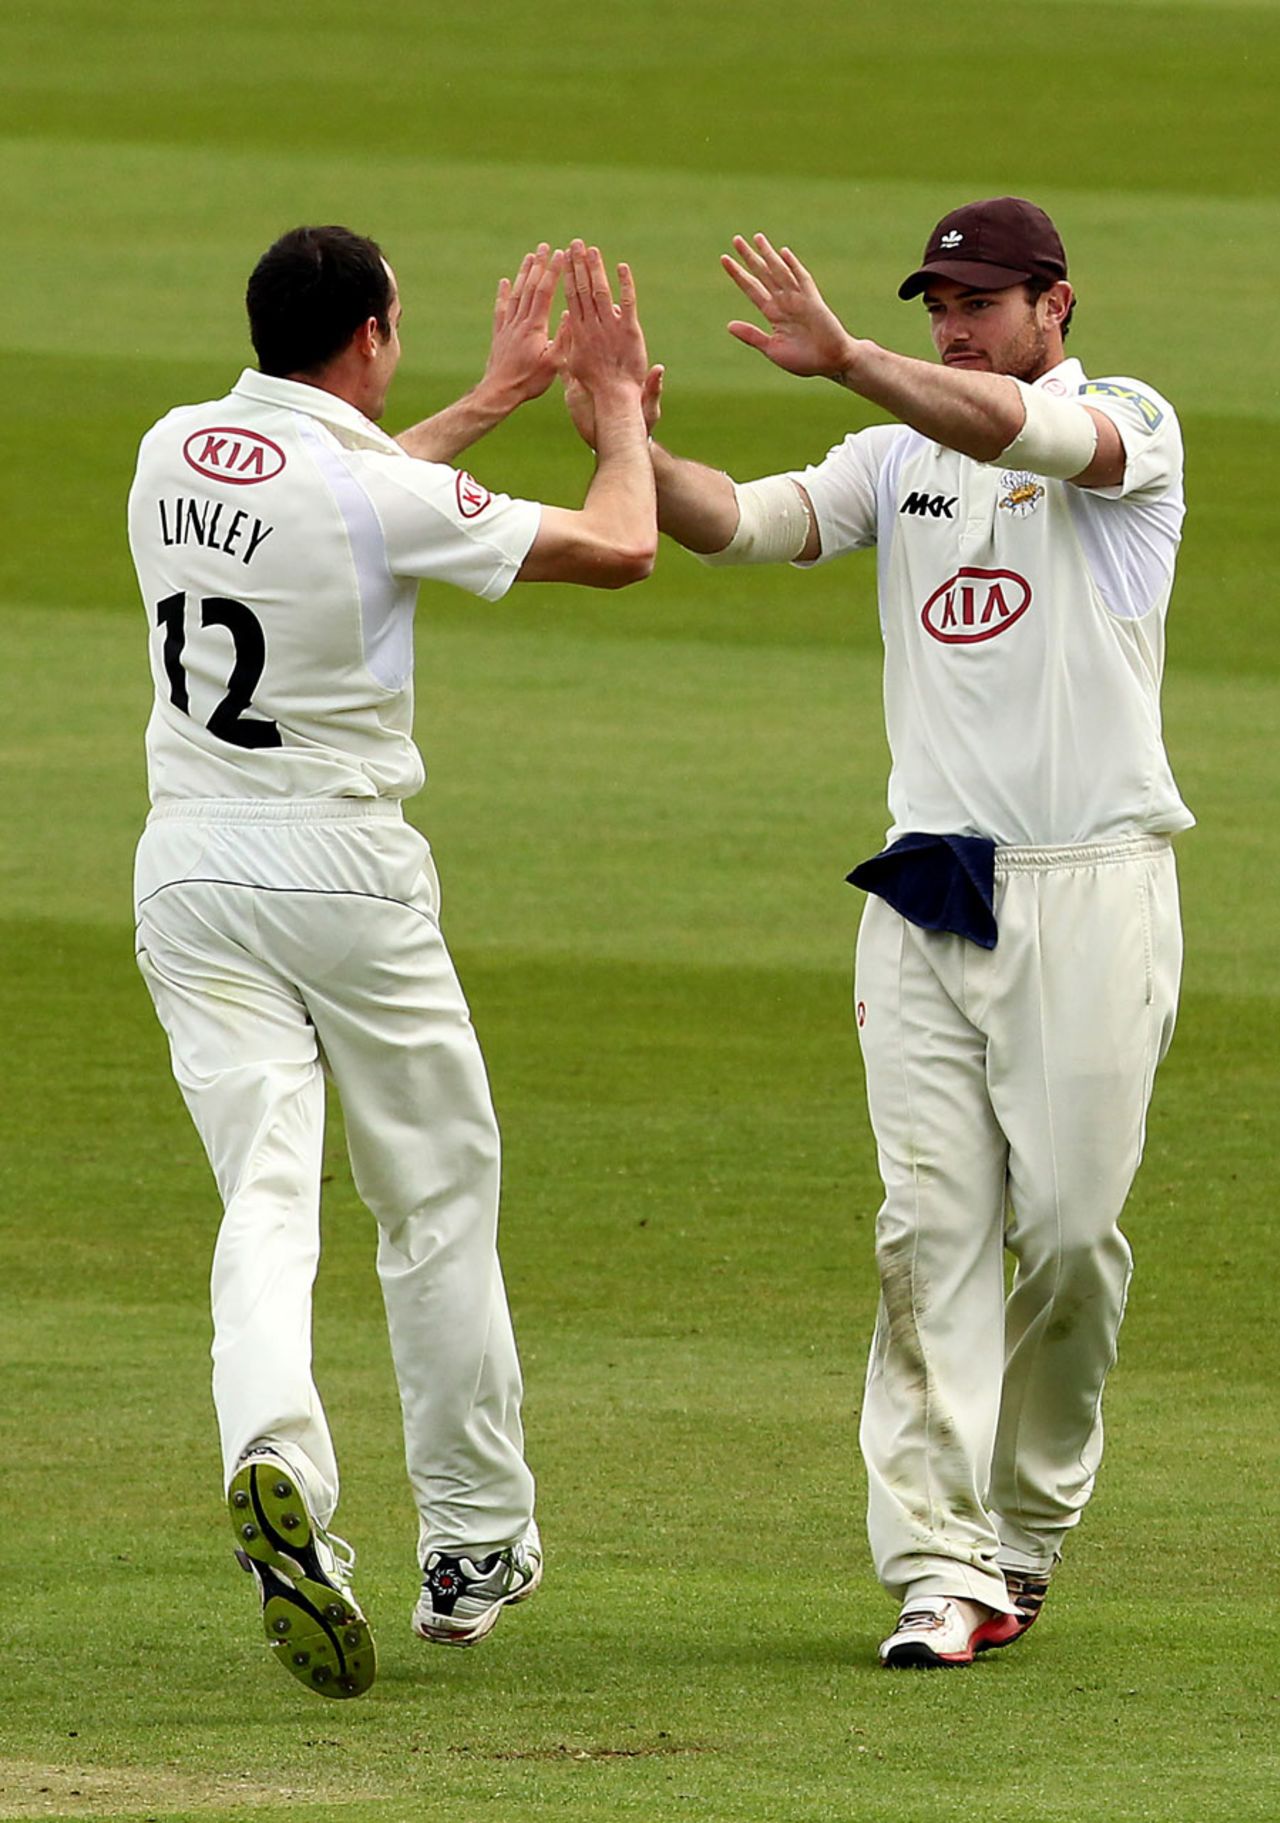 Tim Linley celebrates a wicket with team-mate Tom Maynard, Middlesex v Surrey, County Championship, Division One, Lord's, April 12, 2012